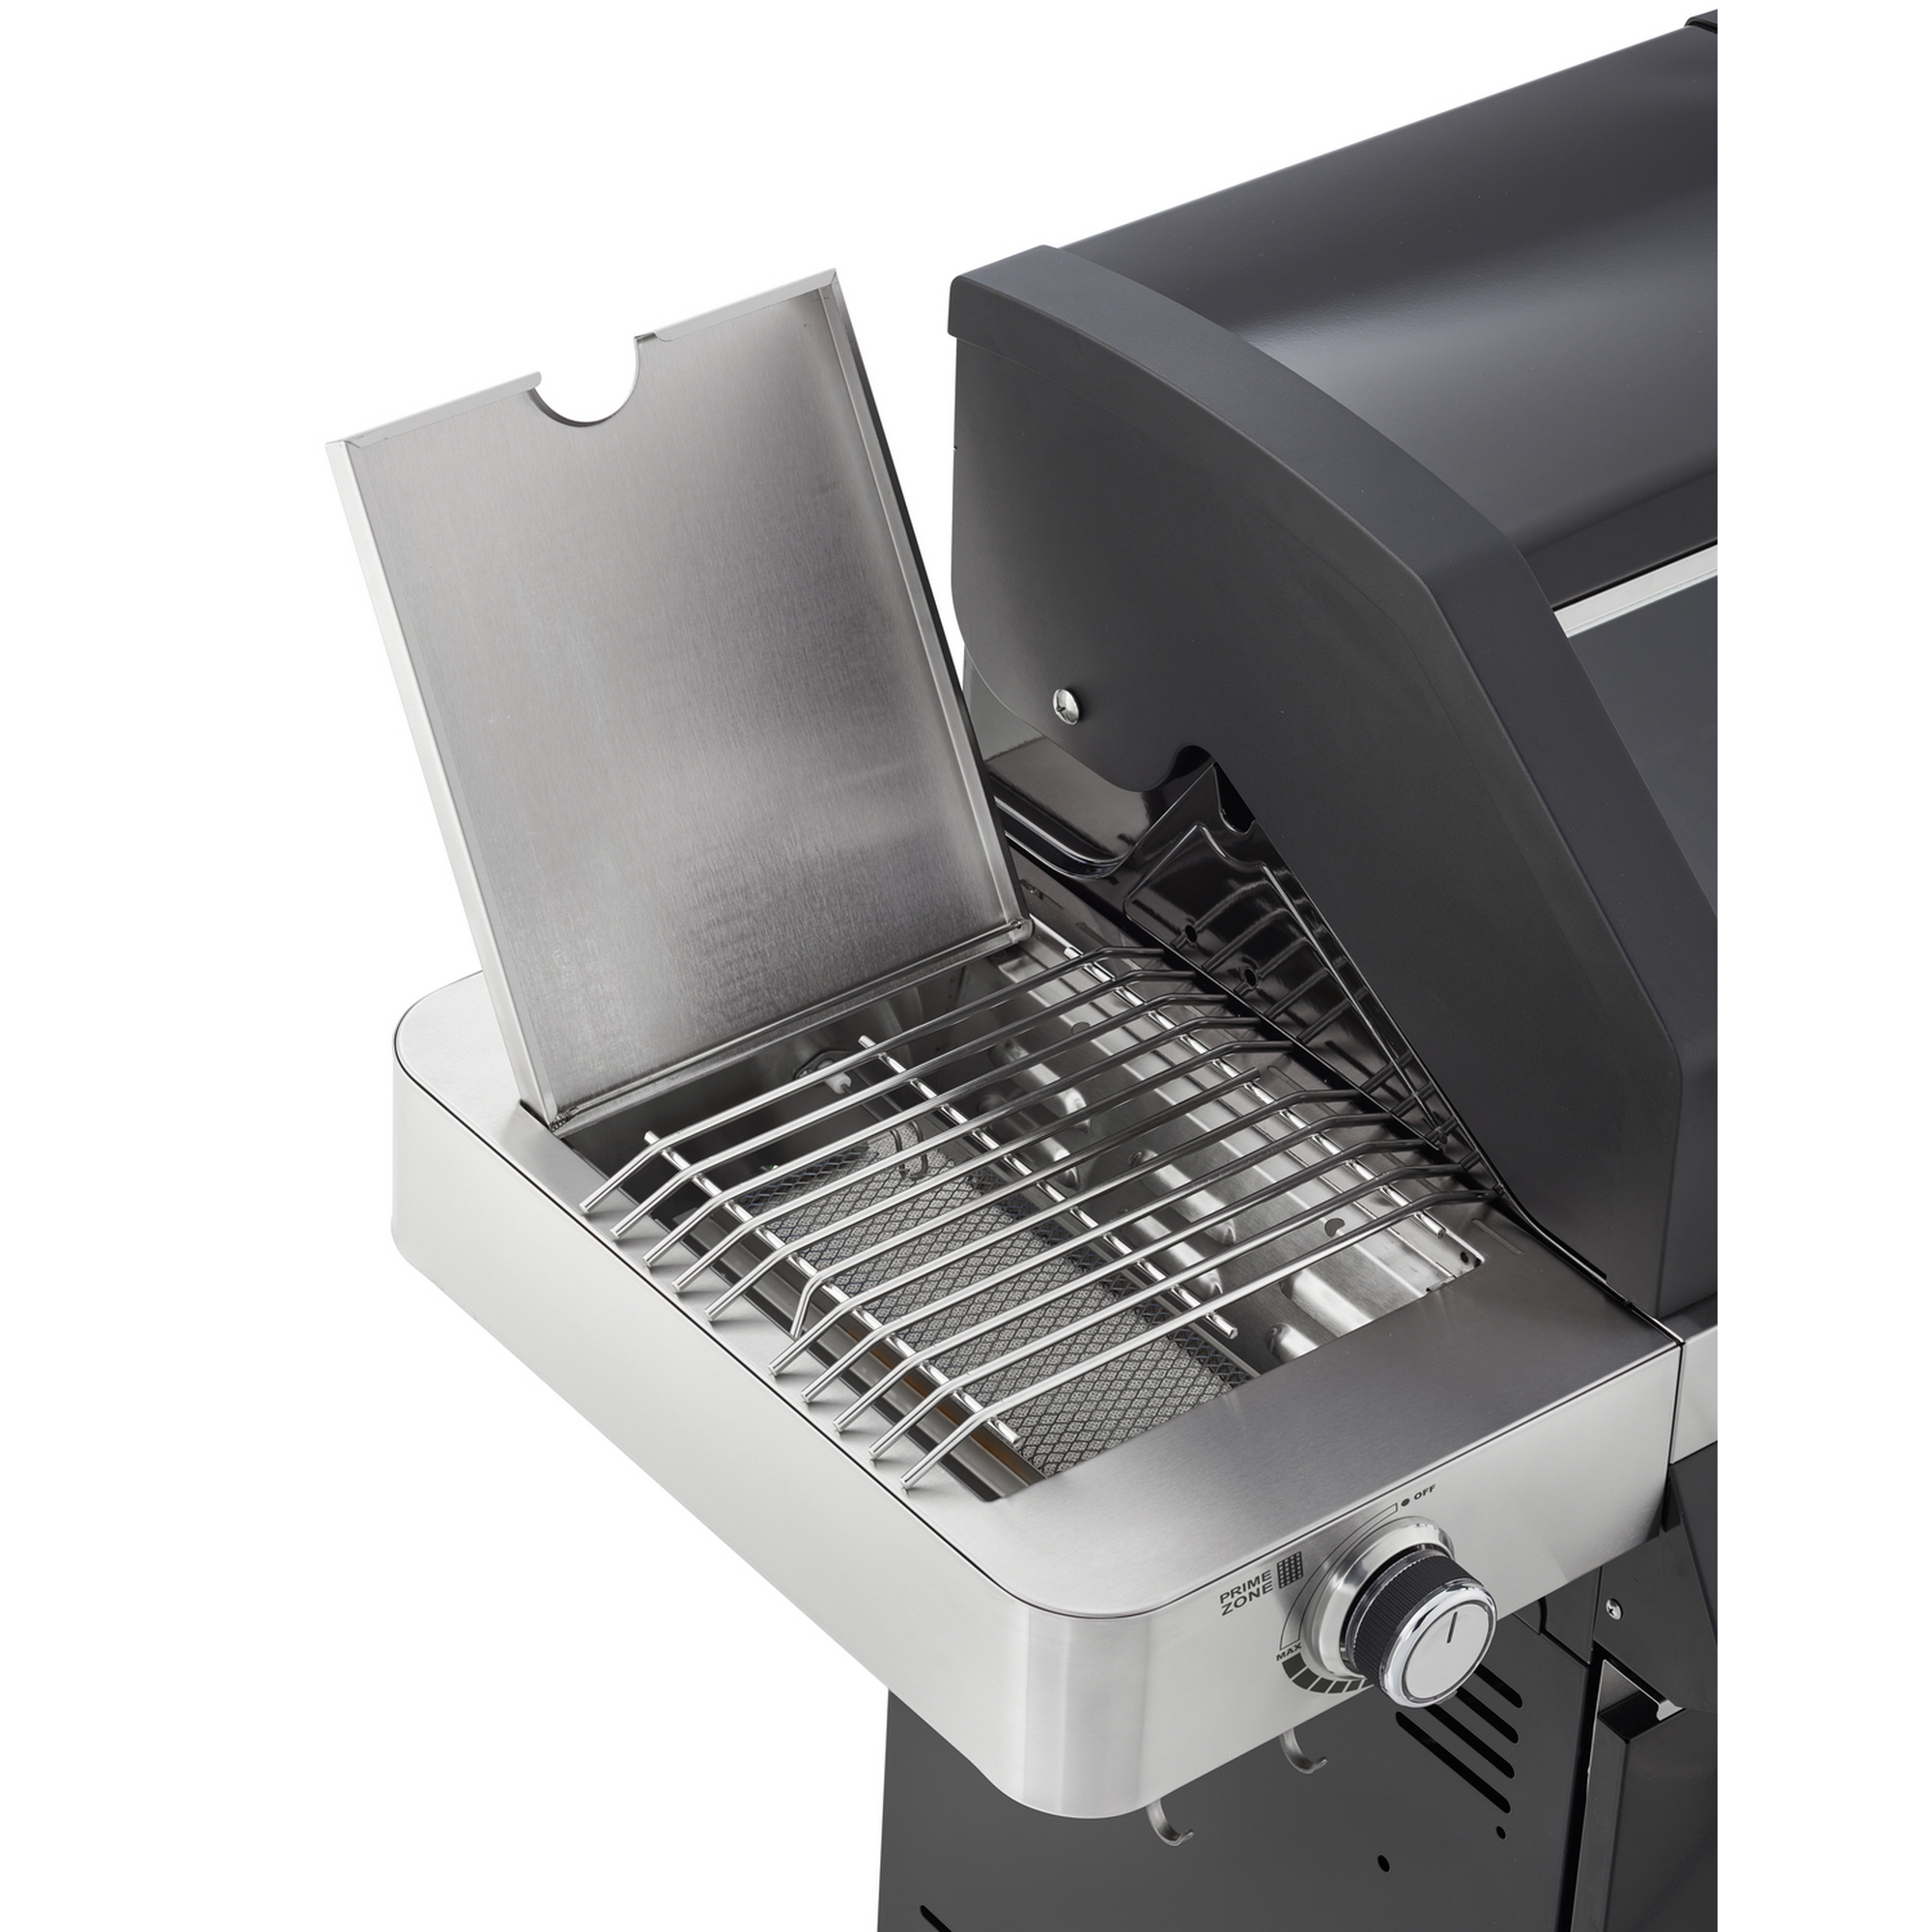 Gasgrill 'BBQ-Station Videro G3-S Vario+' schwarz + product picture